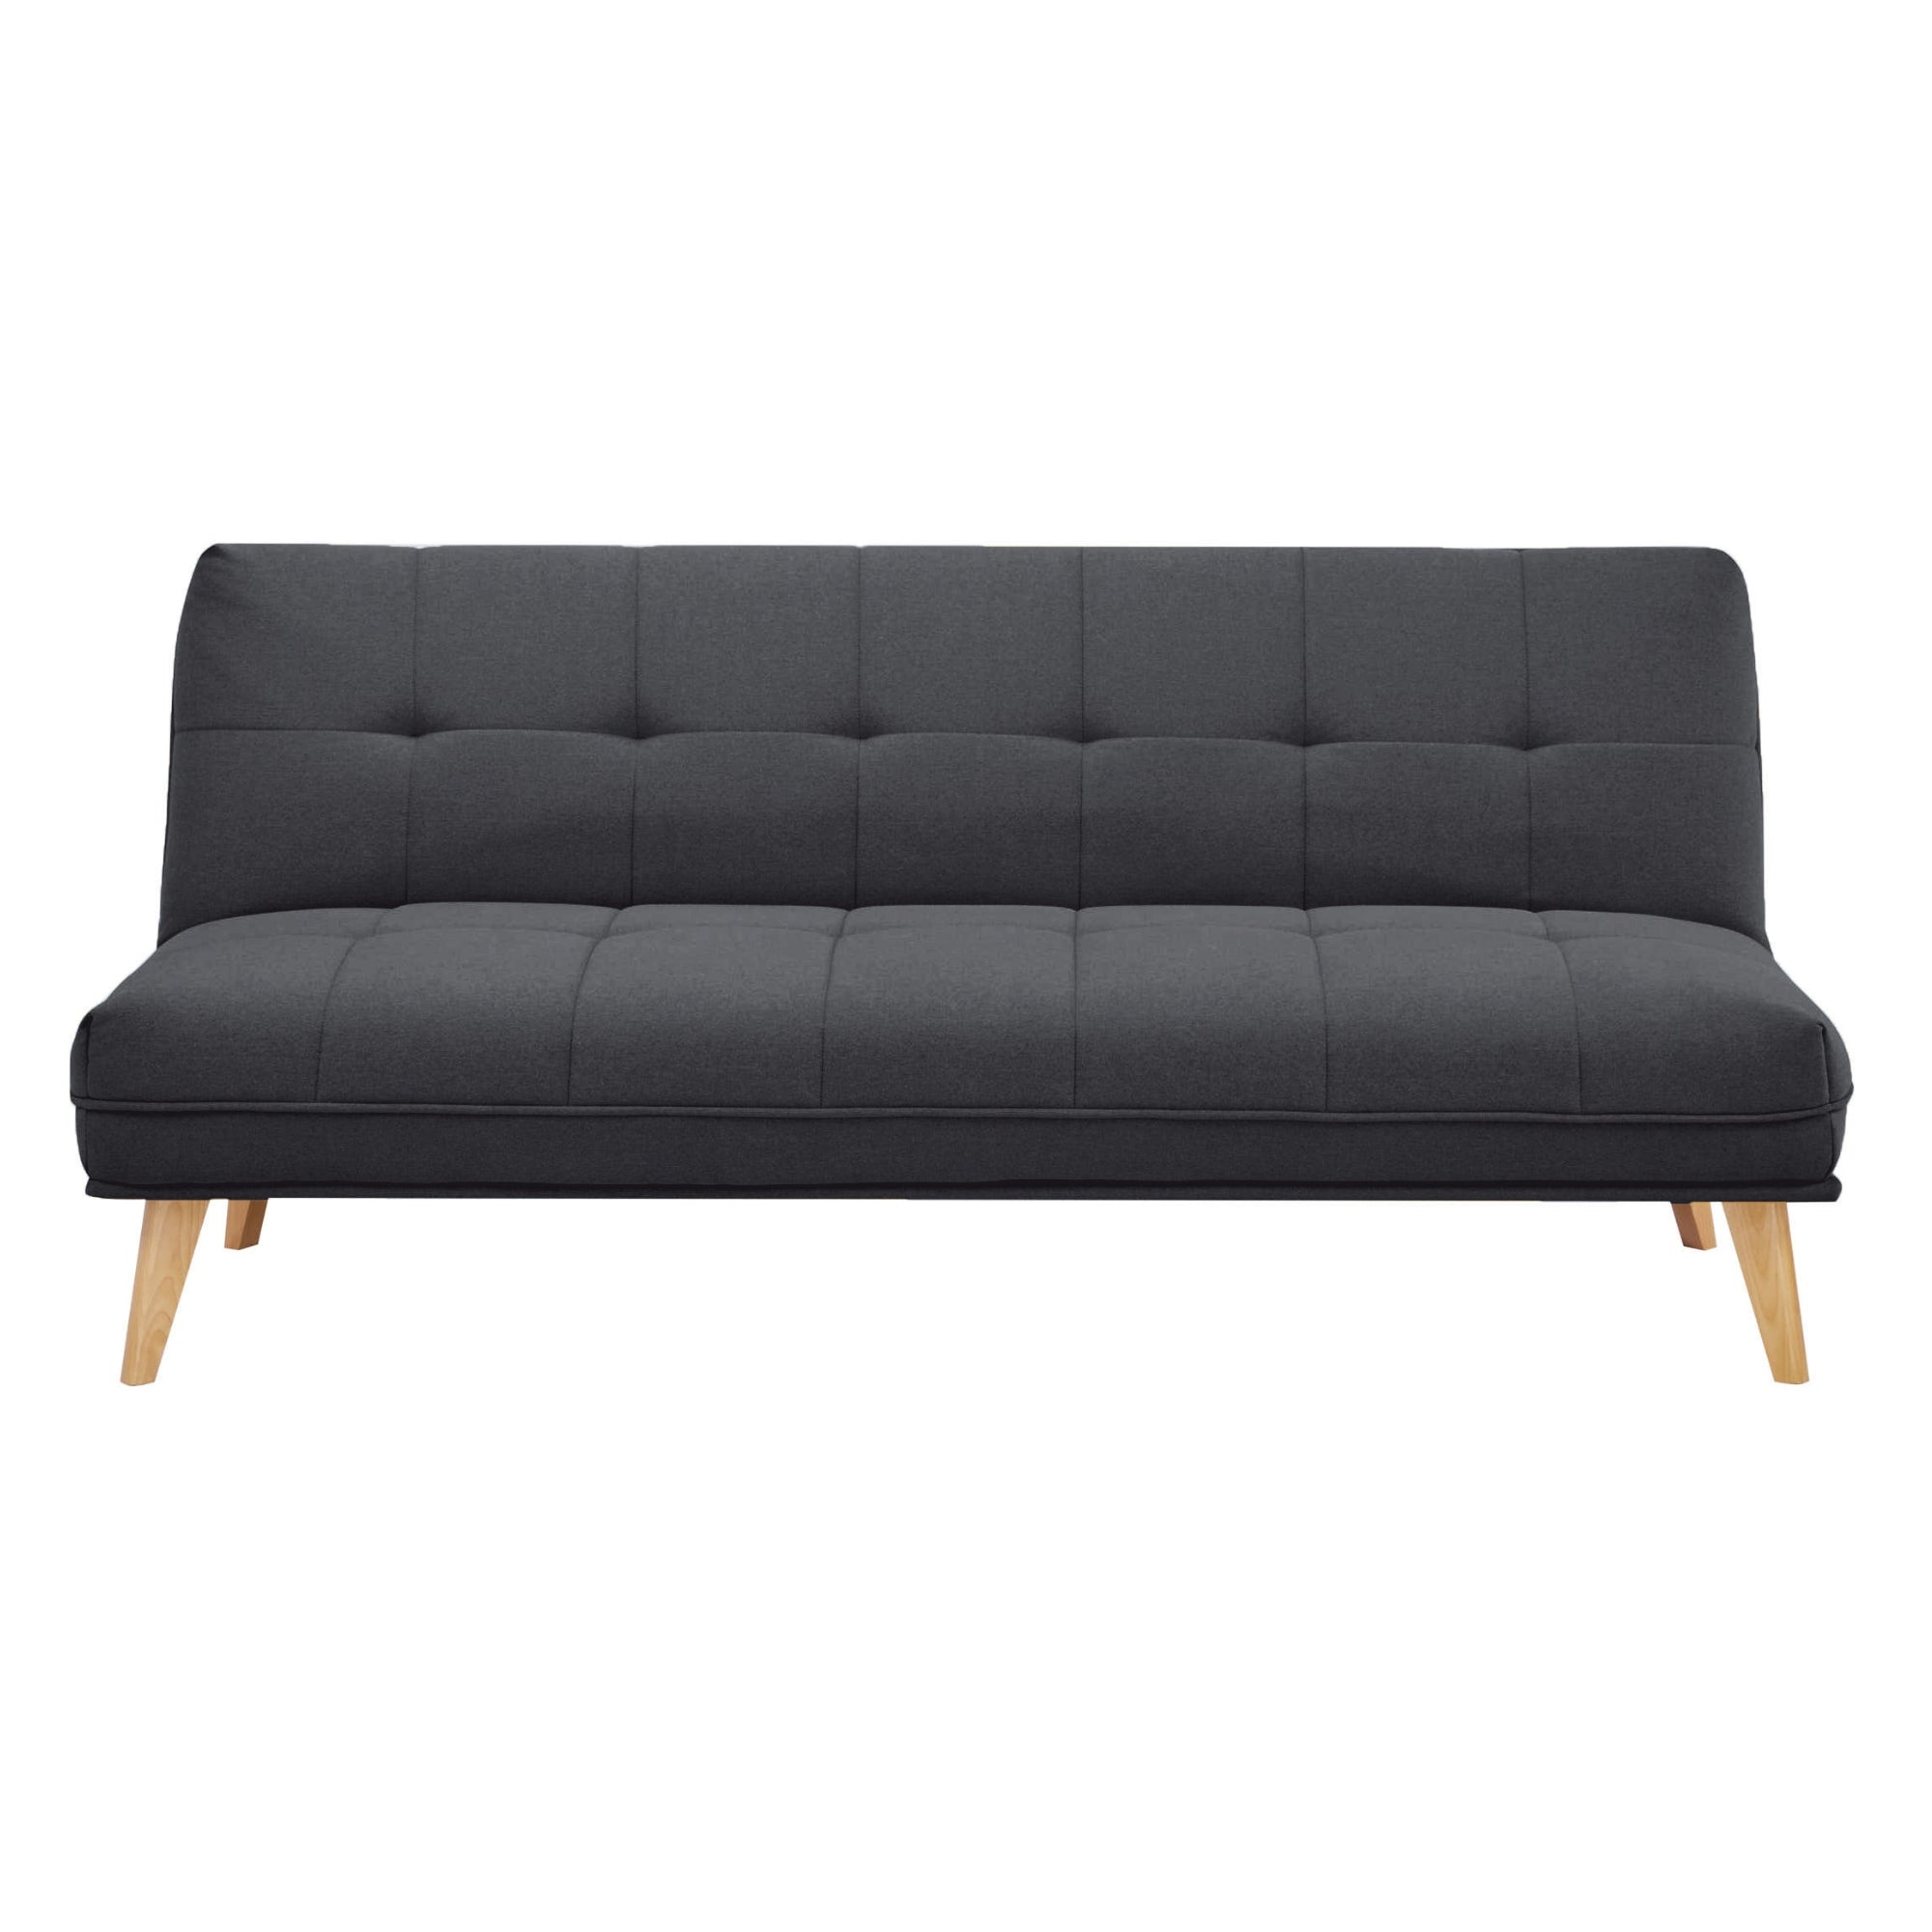 Dark Grey 3-Seater Sofa Bed, Scandinavian Upholstered Couch